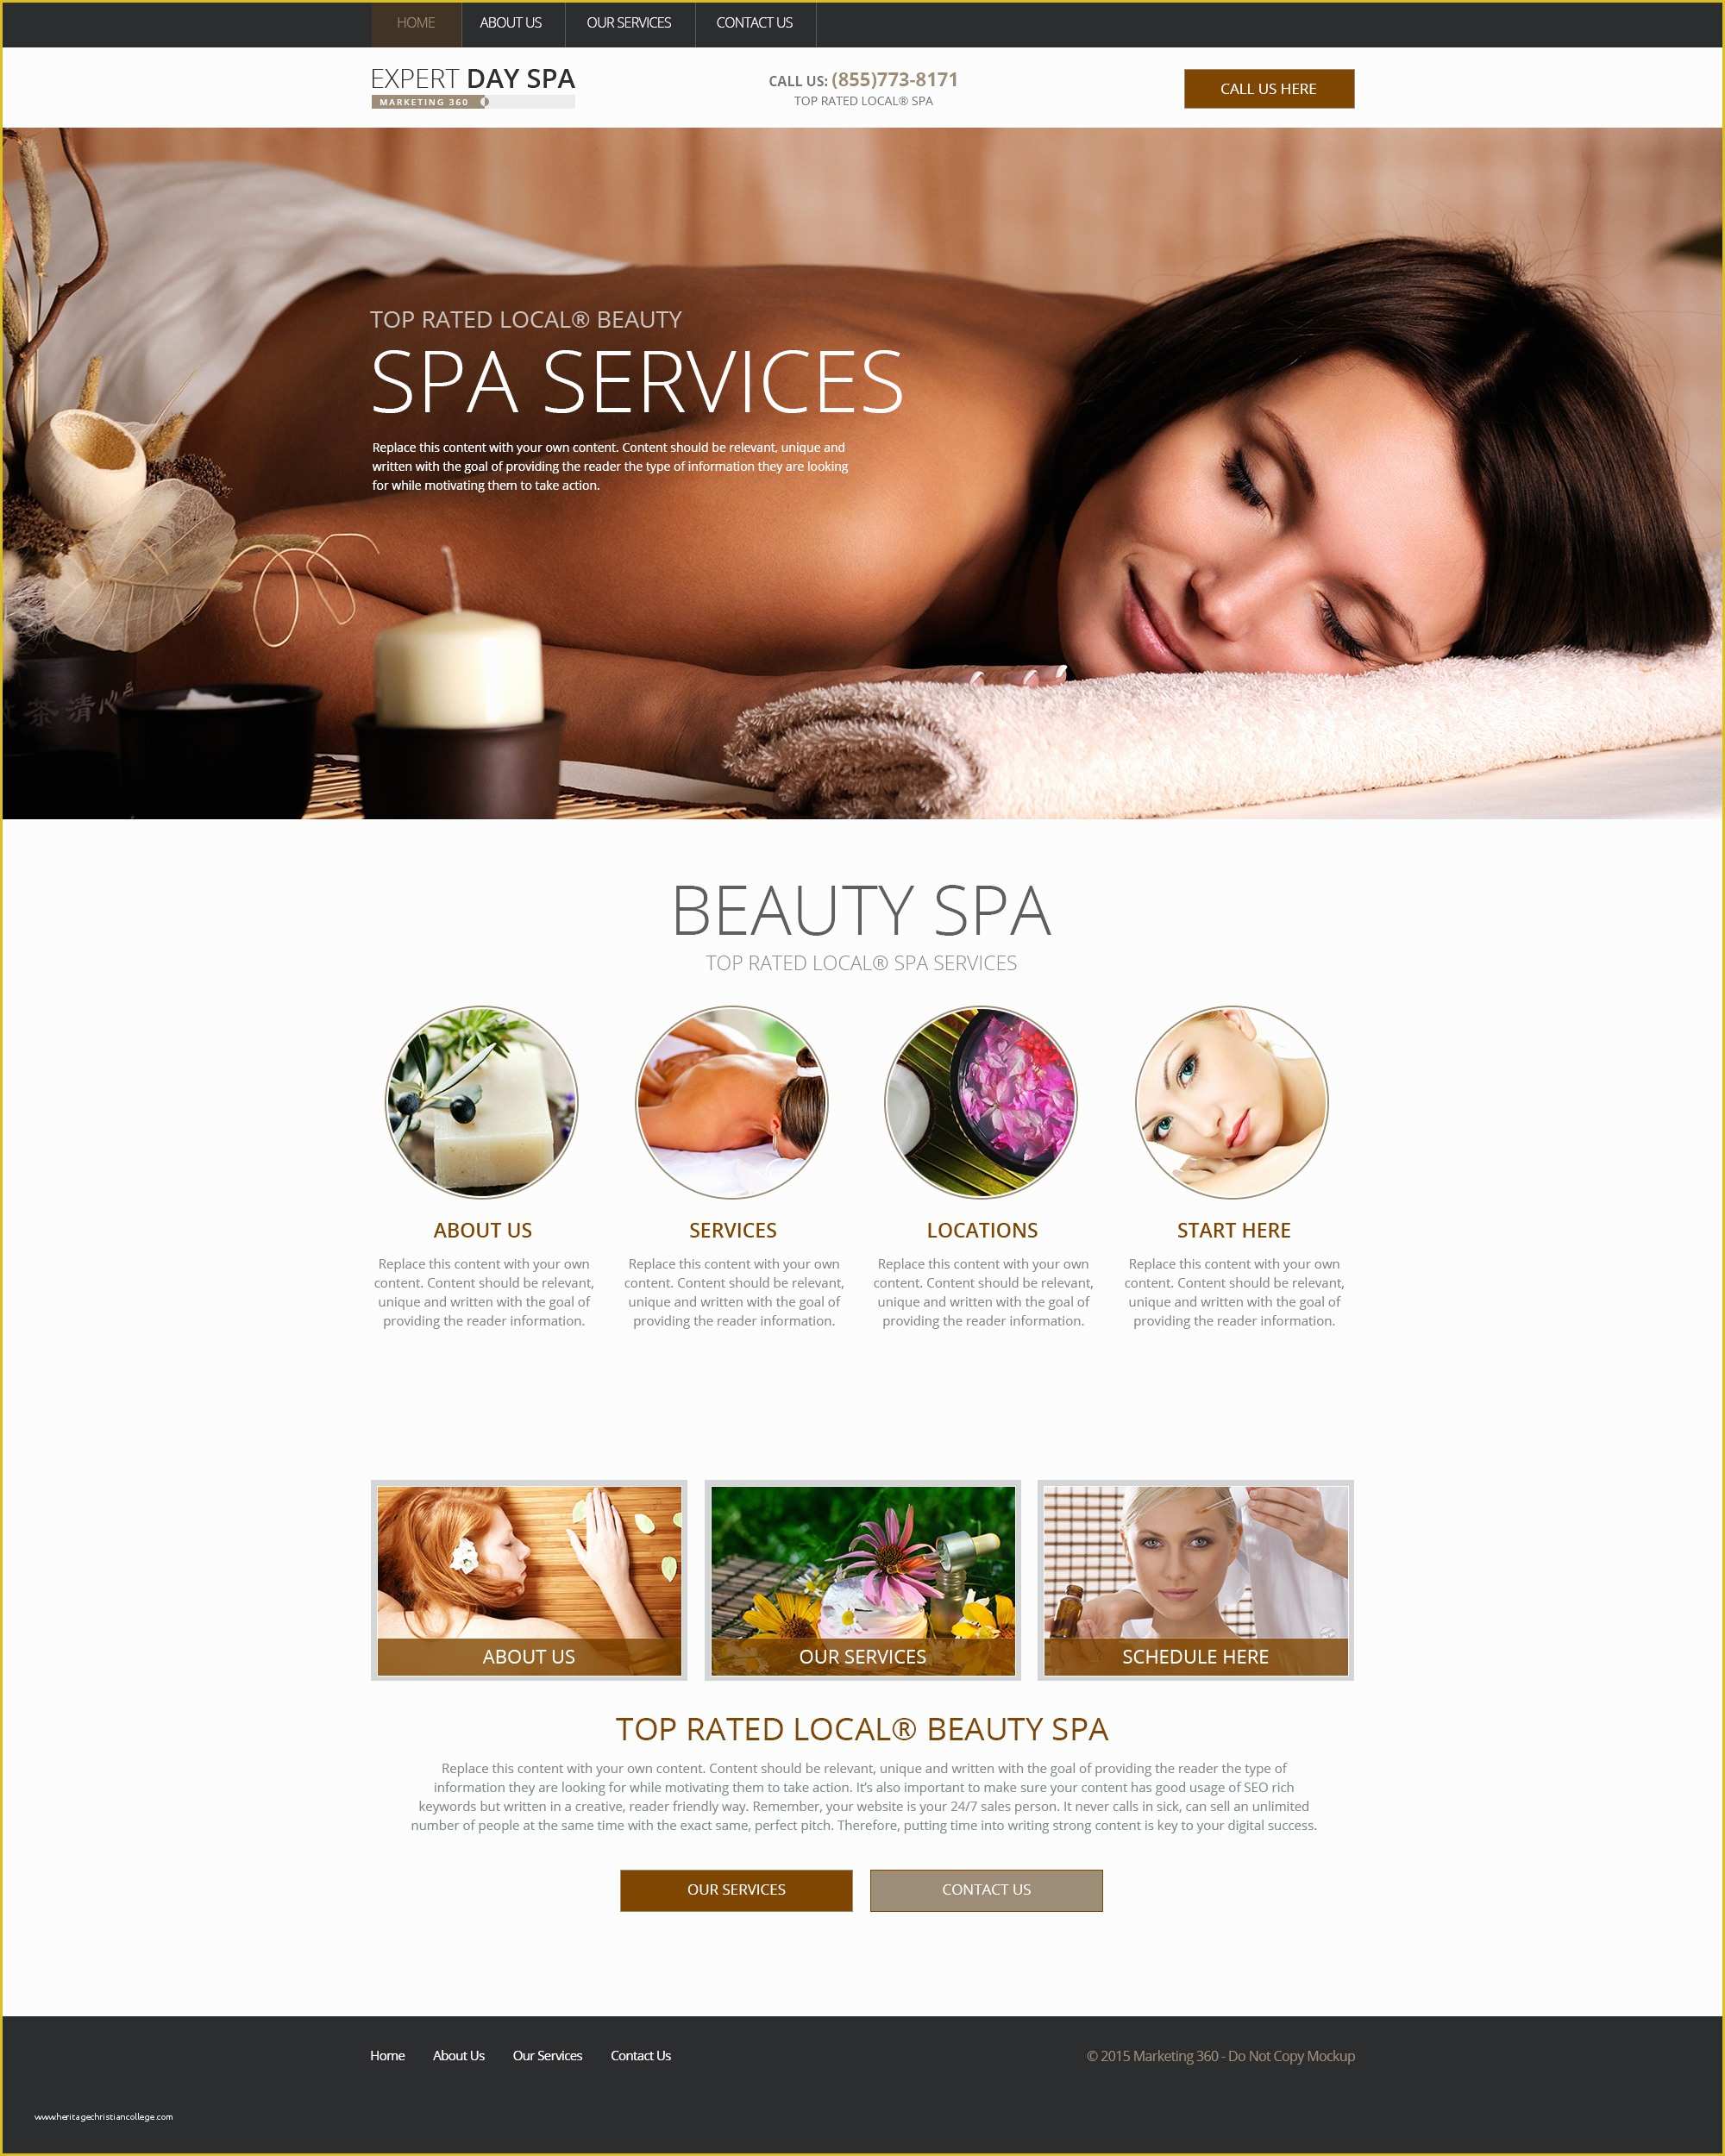 Free Spa Website Templates Of Spa Websites Templates Mobile Responsive Designs for Spas